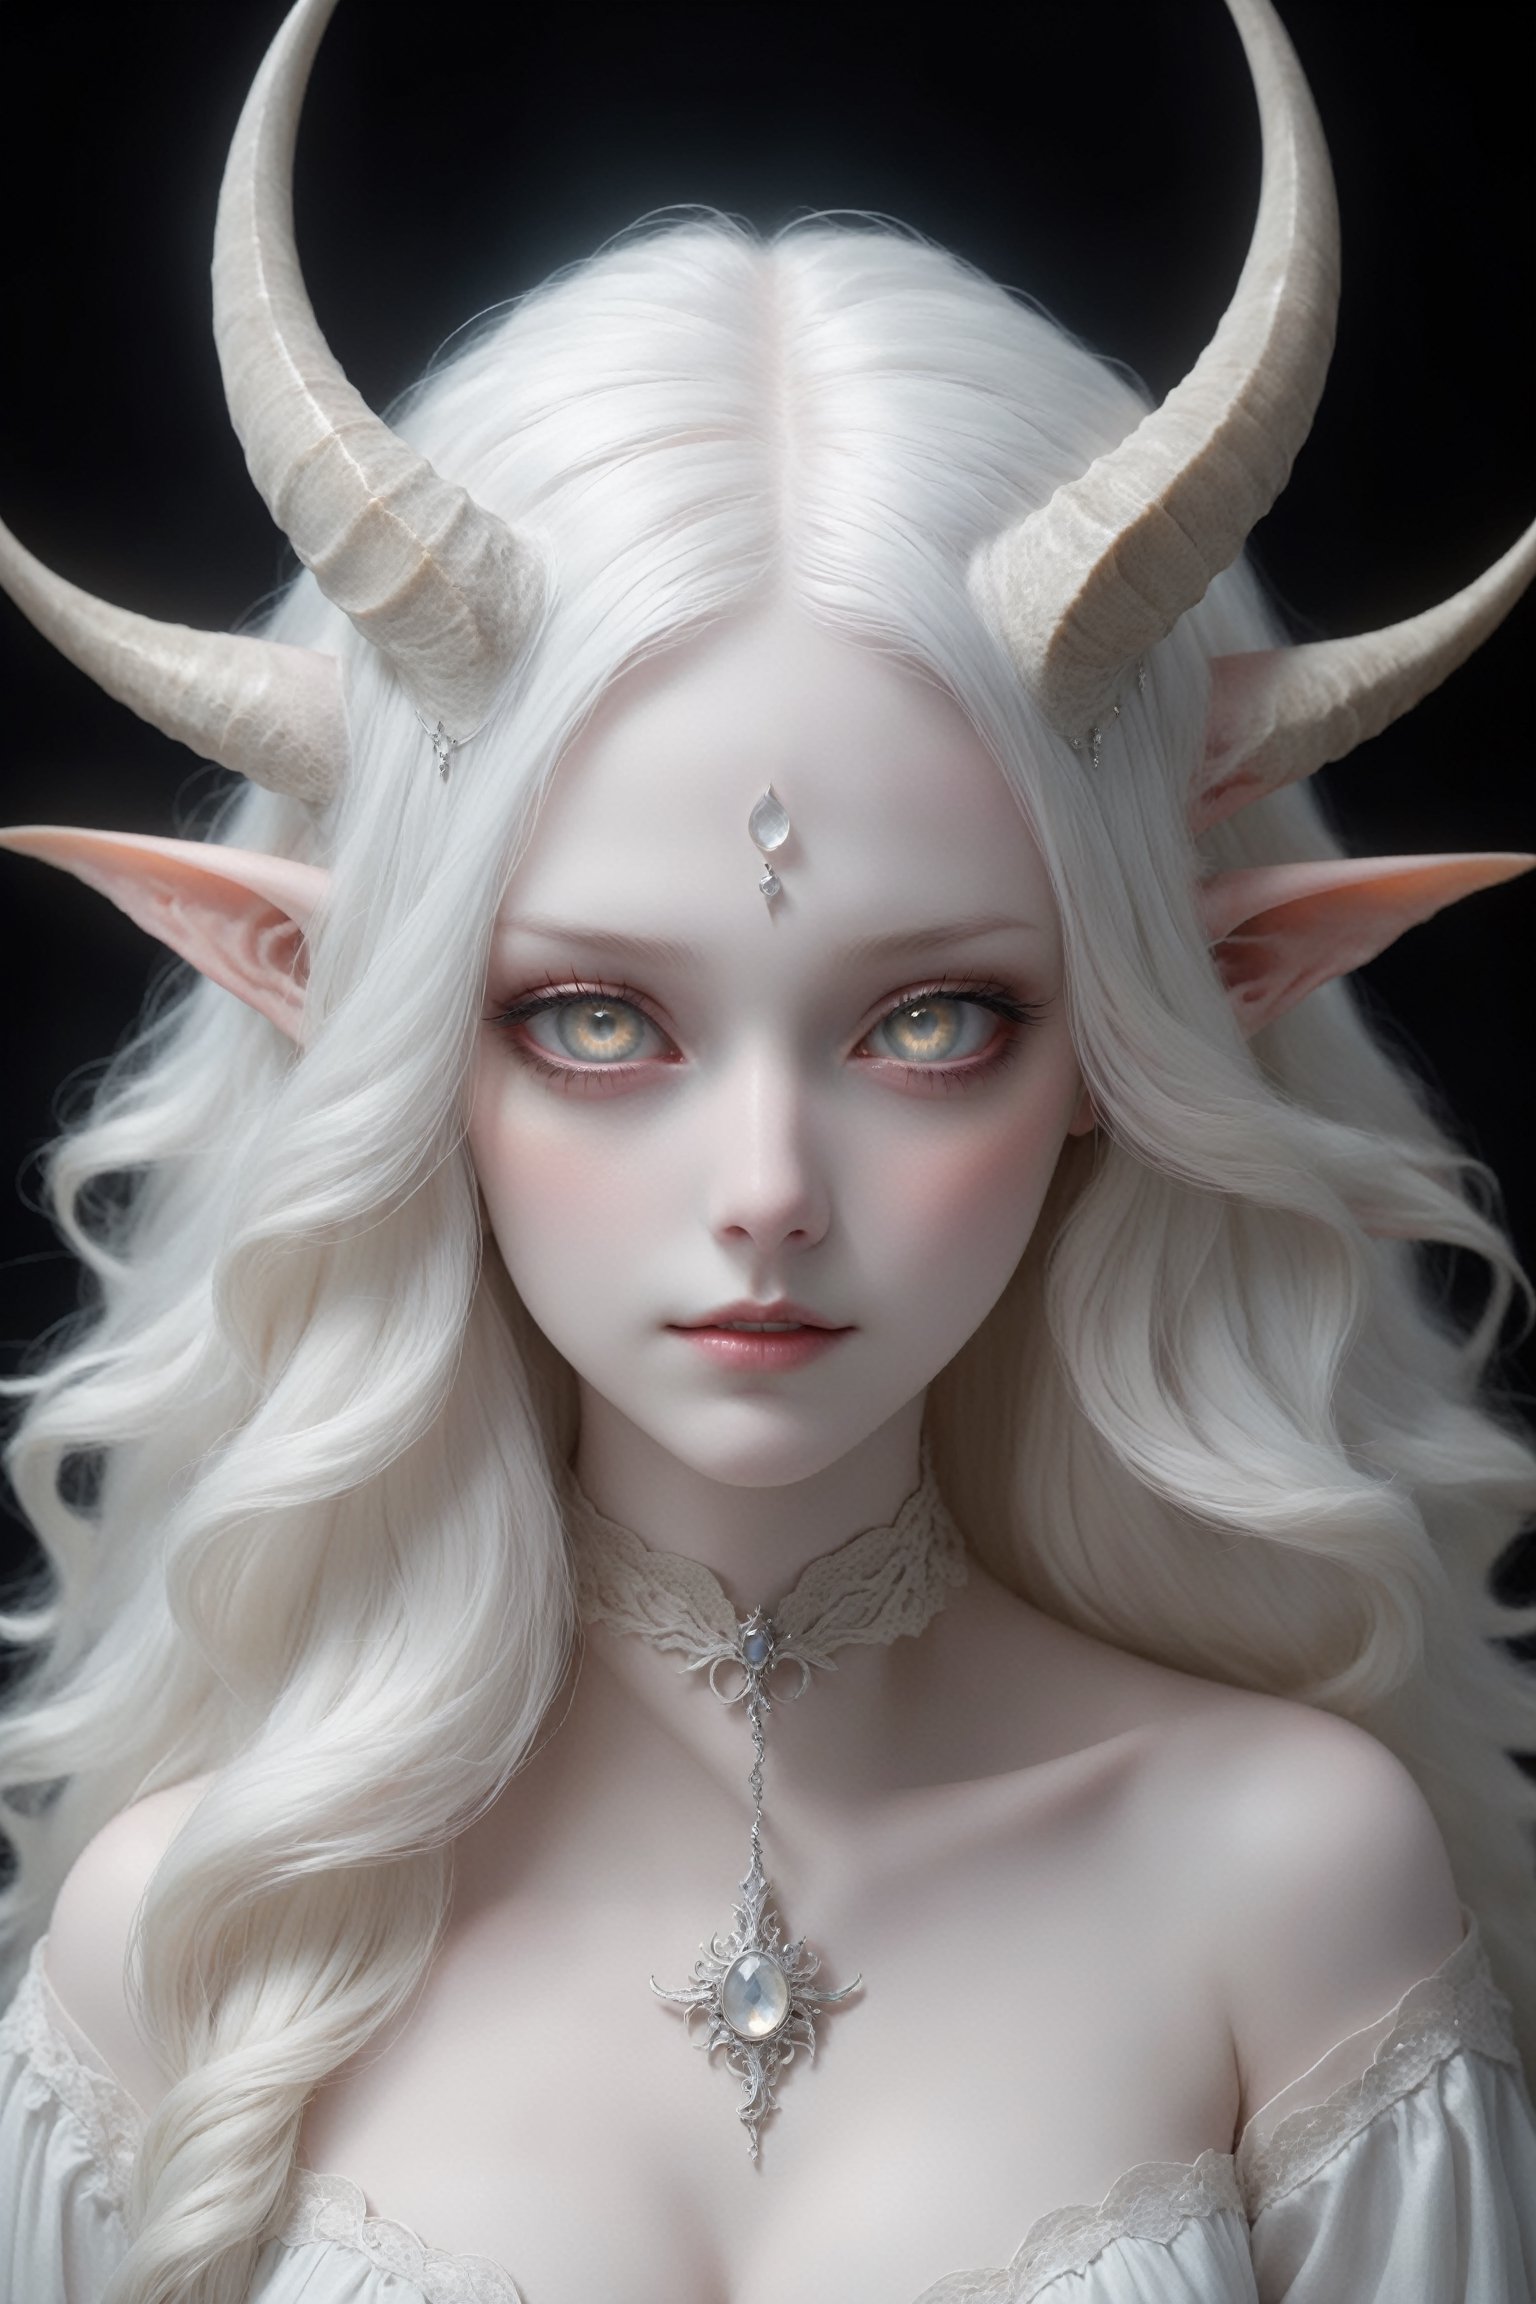 (upper body), (long intricate horns:1.2), sensual albino demon girl with enchantingly beautiful, alabaster skin, {{{naked breasts}}}, thinking, thoughtful, A benevolent smile, girl has beautiful deep eyes, soft expression, Depth and Dimension in the Pupils,  Her porcelain-like white skin reflects an almost celestial glow, highlighting her ethereal nature, ornate jewels, the scene is Illuminated with soft enchanting light to accentuate the magical and mysterious atmosphere, goth person, realistic, Wonder of Art and Beauty, ghost person,ghost person,F41Arm0rXL ,DonMM4g1cXL 